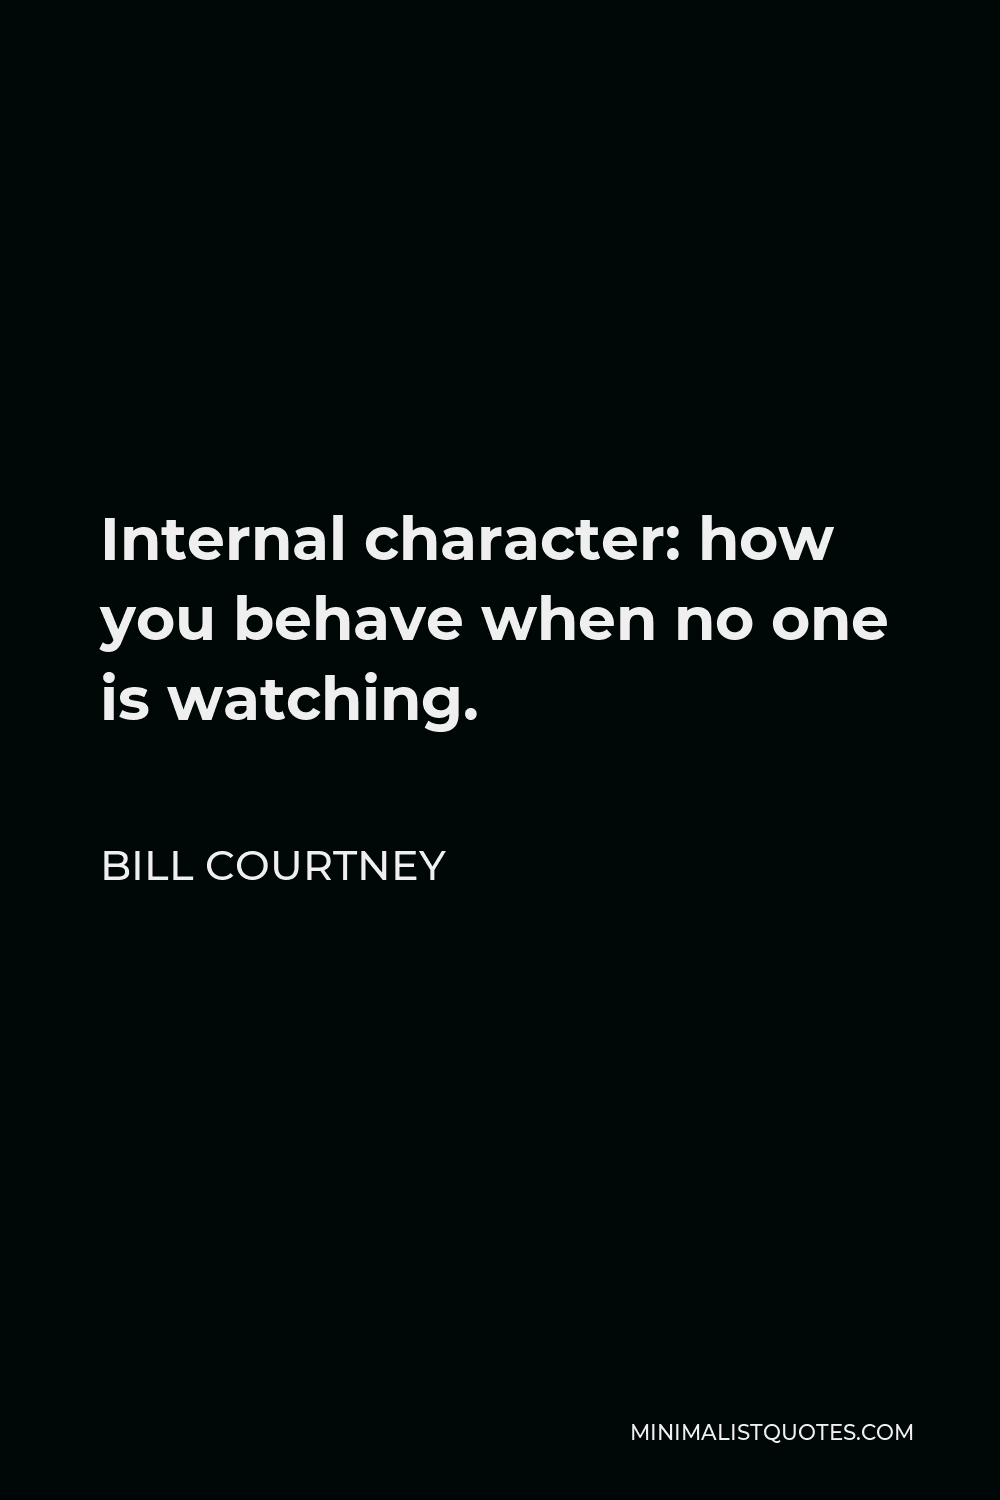 Bill Courtney Quote - Internal character: how you behave when no one is watching.